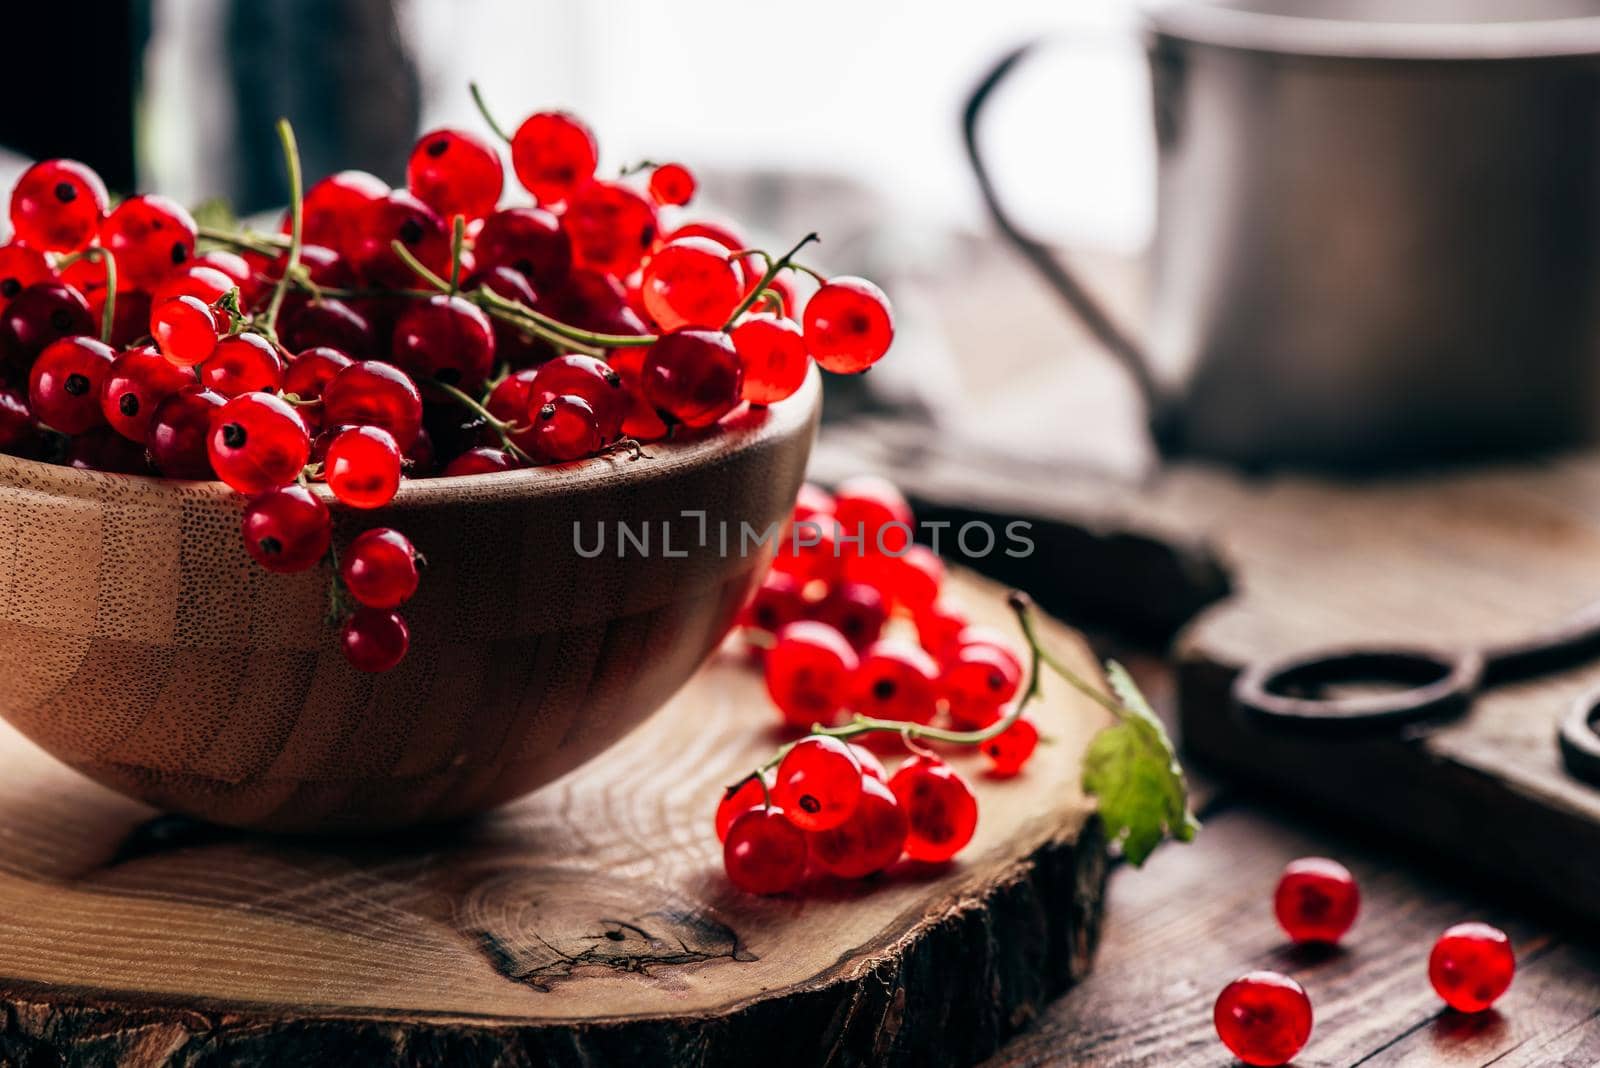 Fresh picked red currants by Seva_blsv